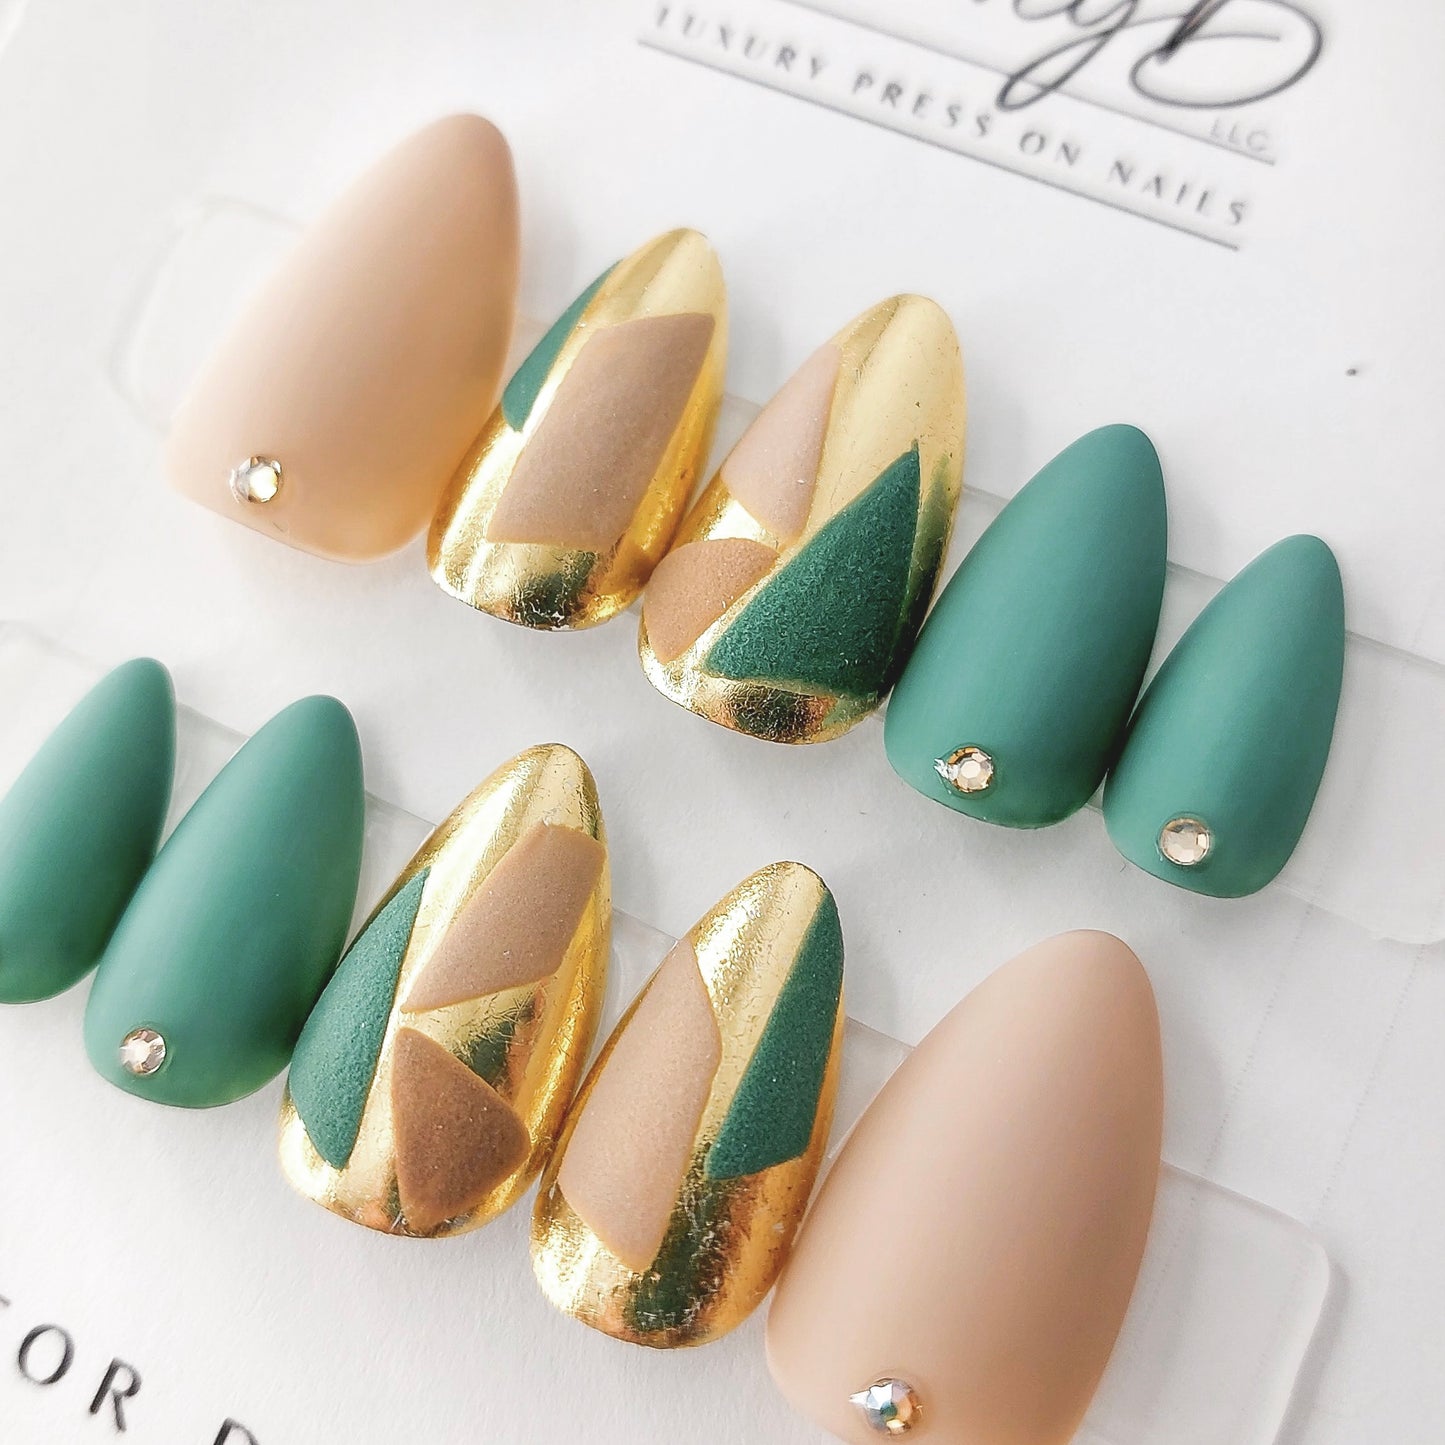 custom press on nails with color block beige and teal with gold chrome and geometric designs. Matte finish on short almond shape.